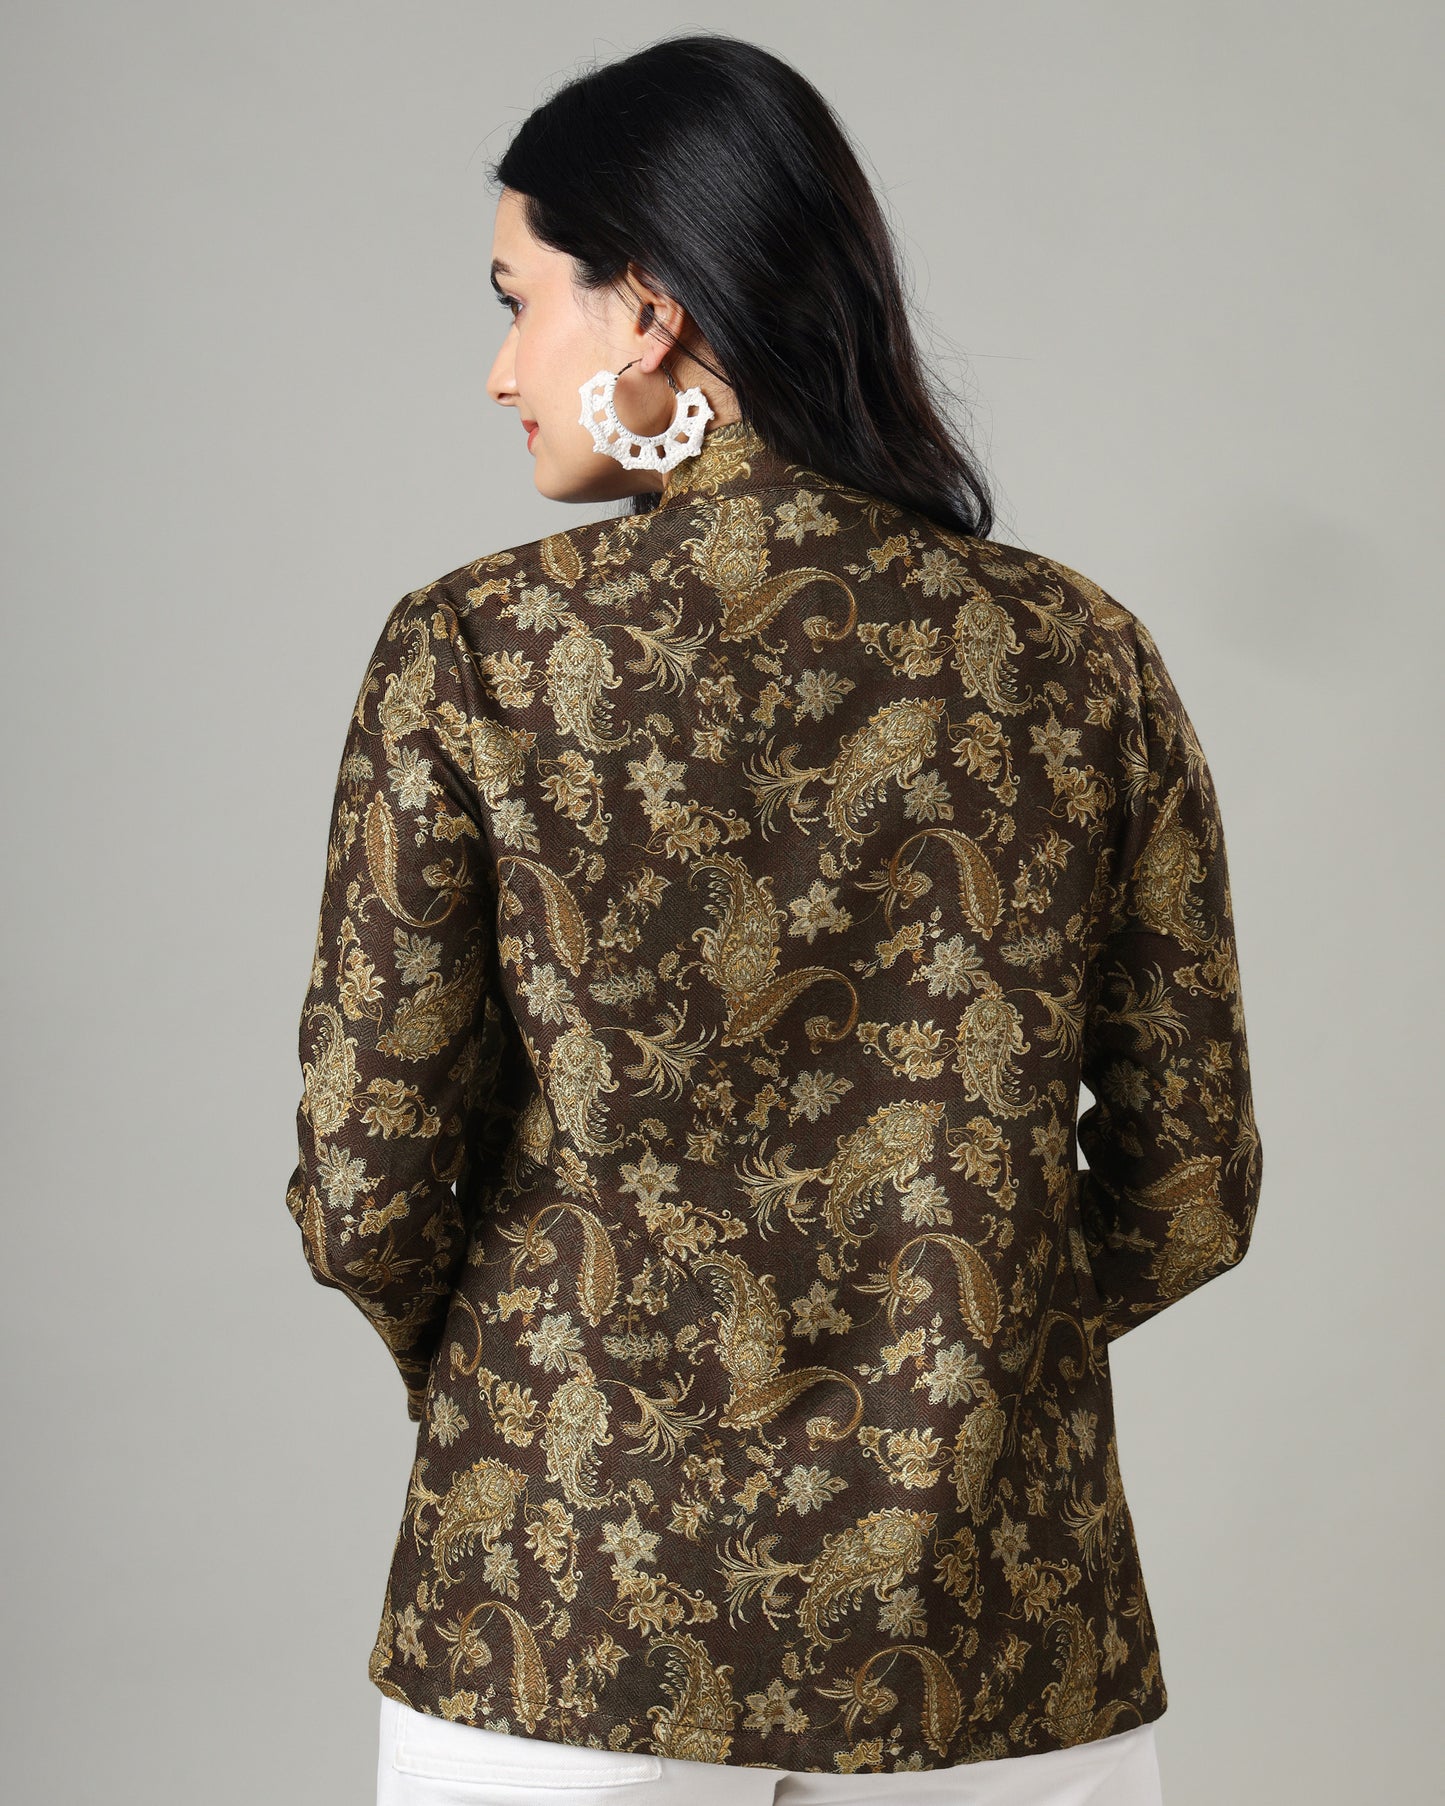 The Passionately Crafted Women's Paisley Jacket